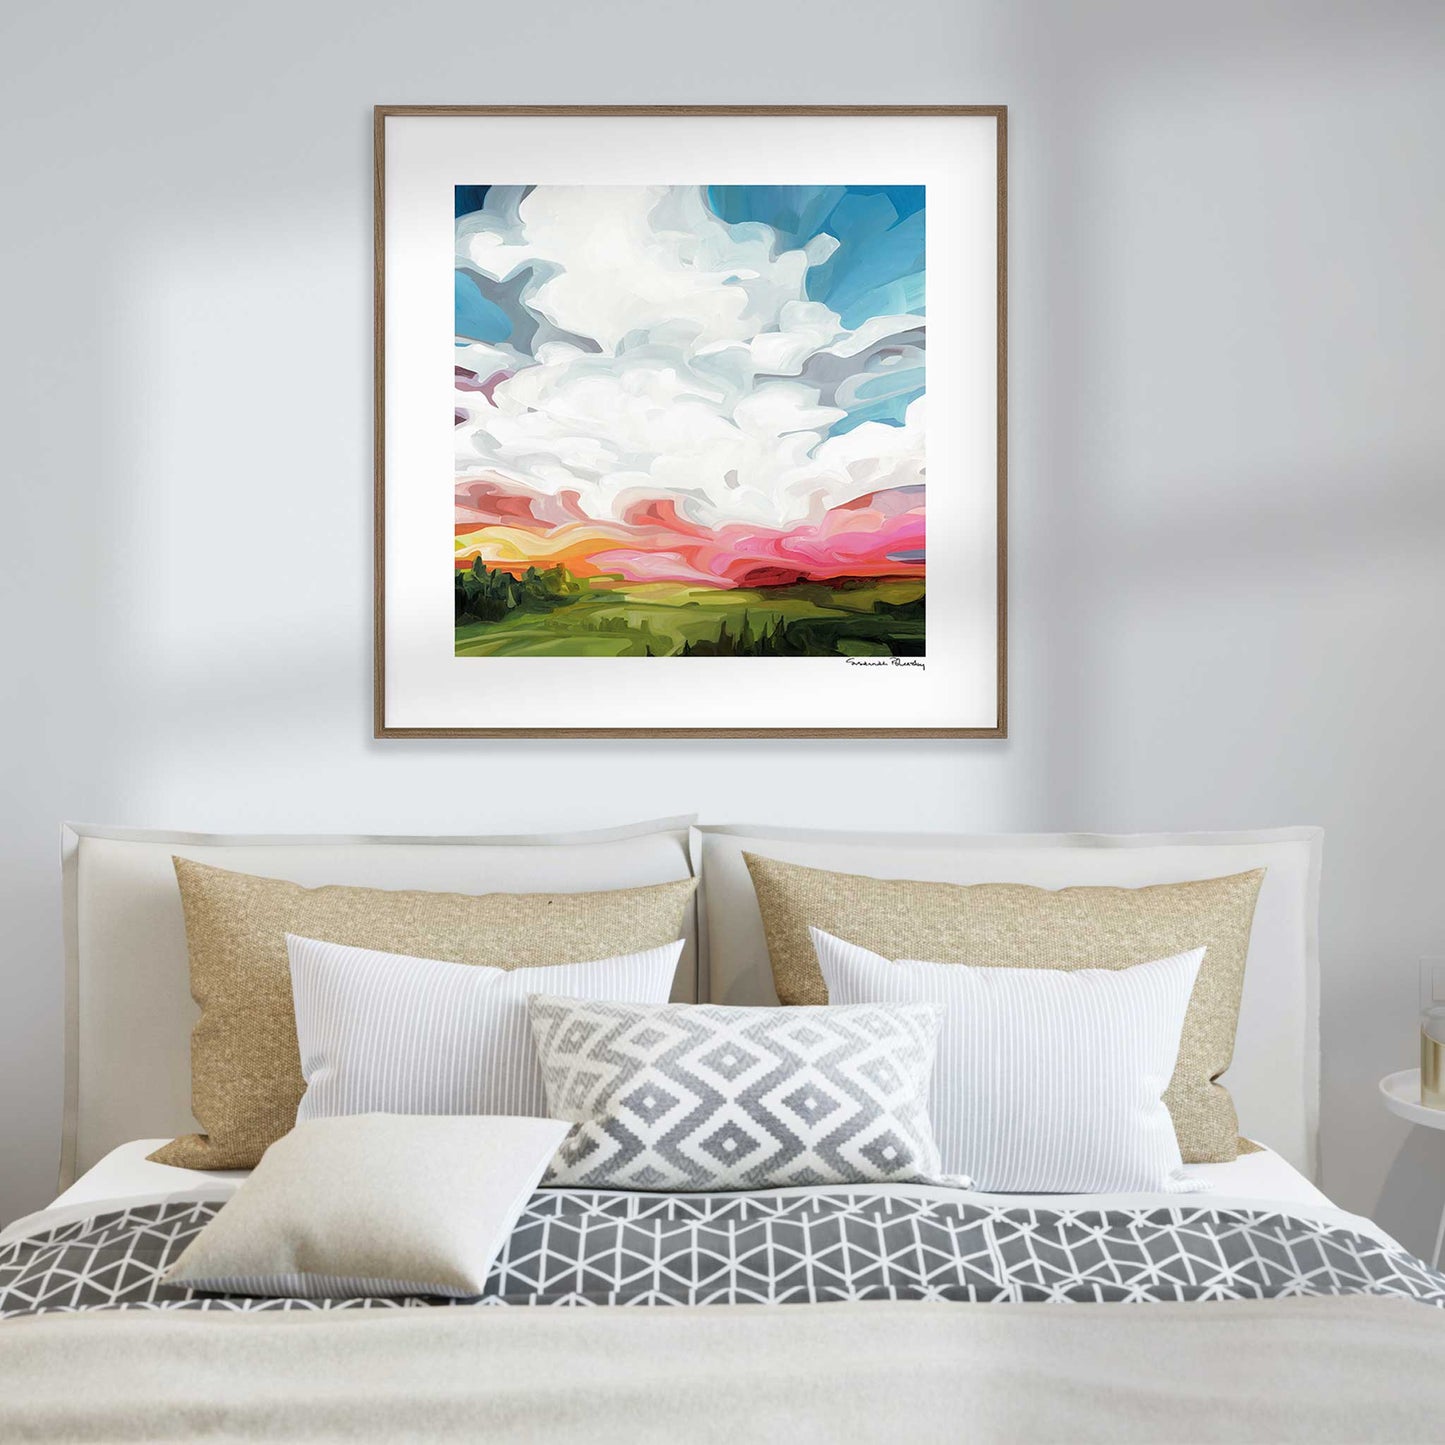 framed sky painting art print hanging as wall art over bed